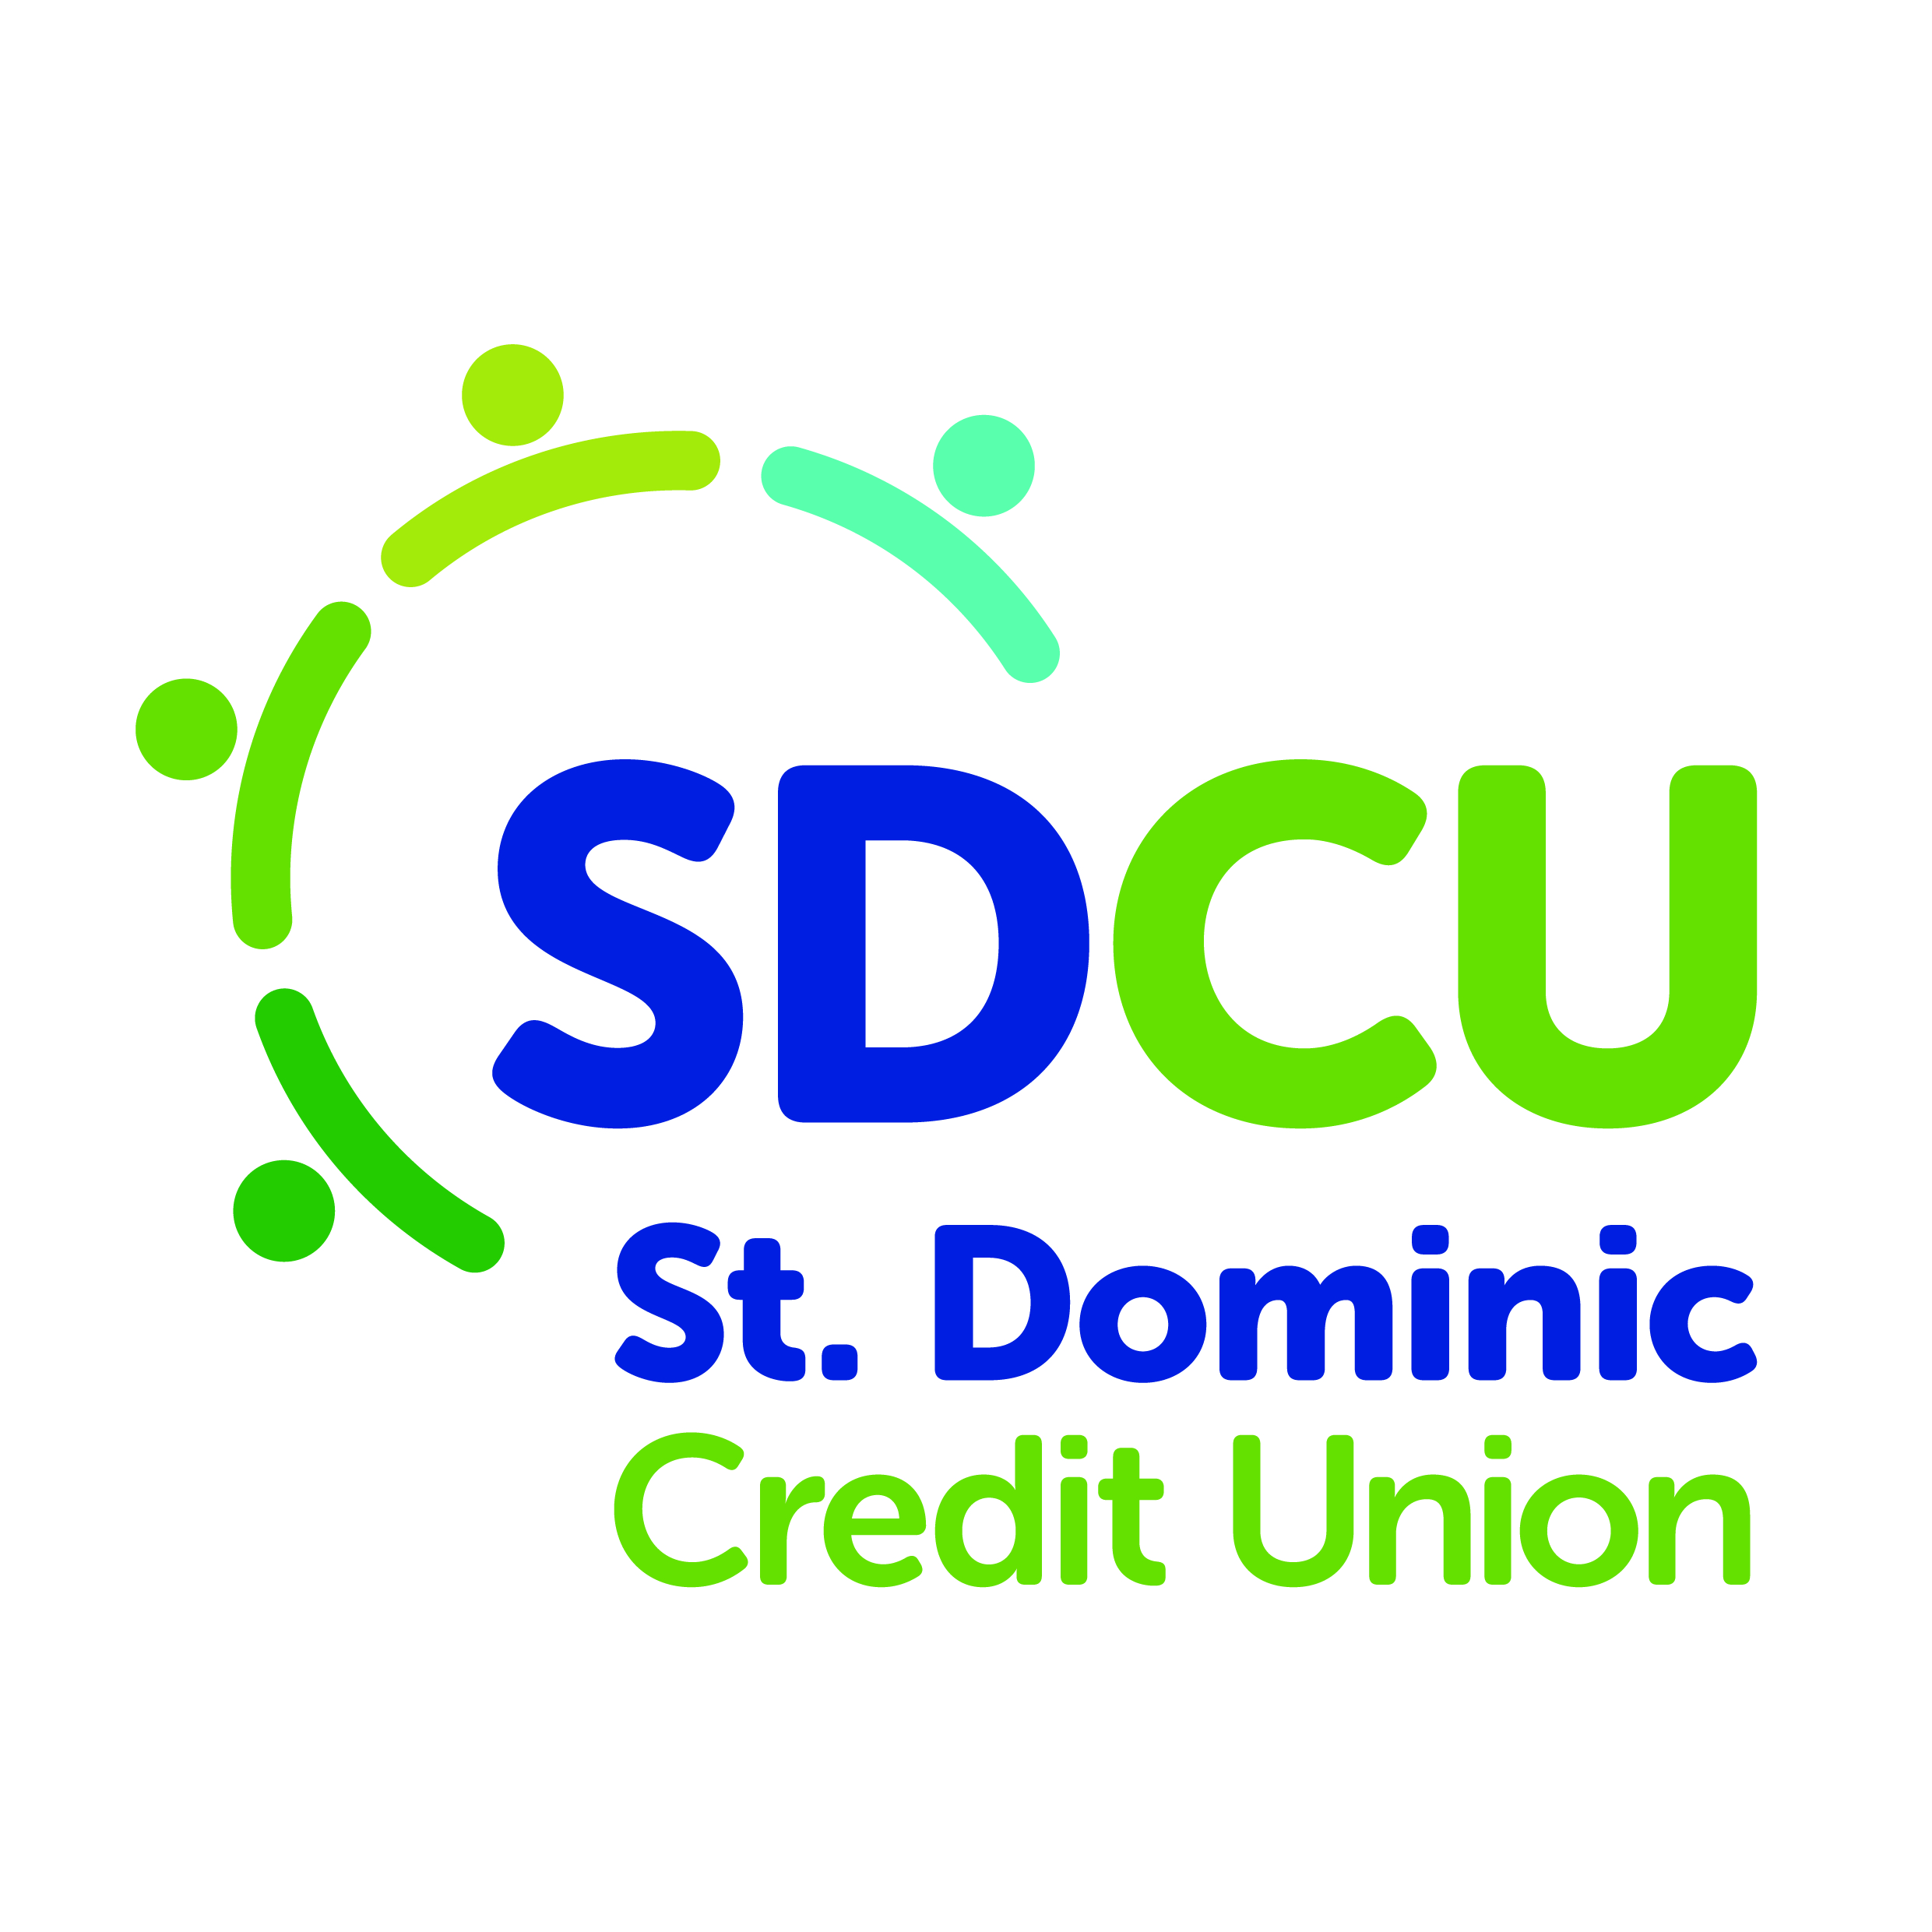 st. dominic credit union may 17